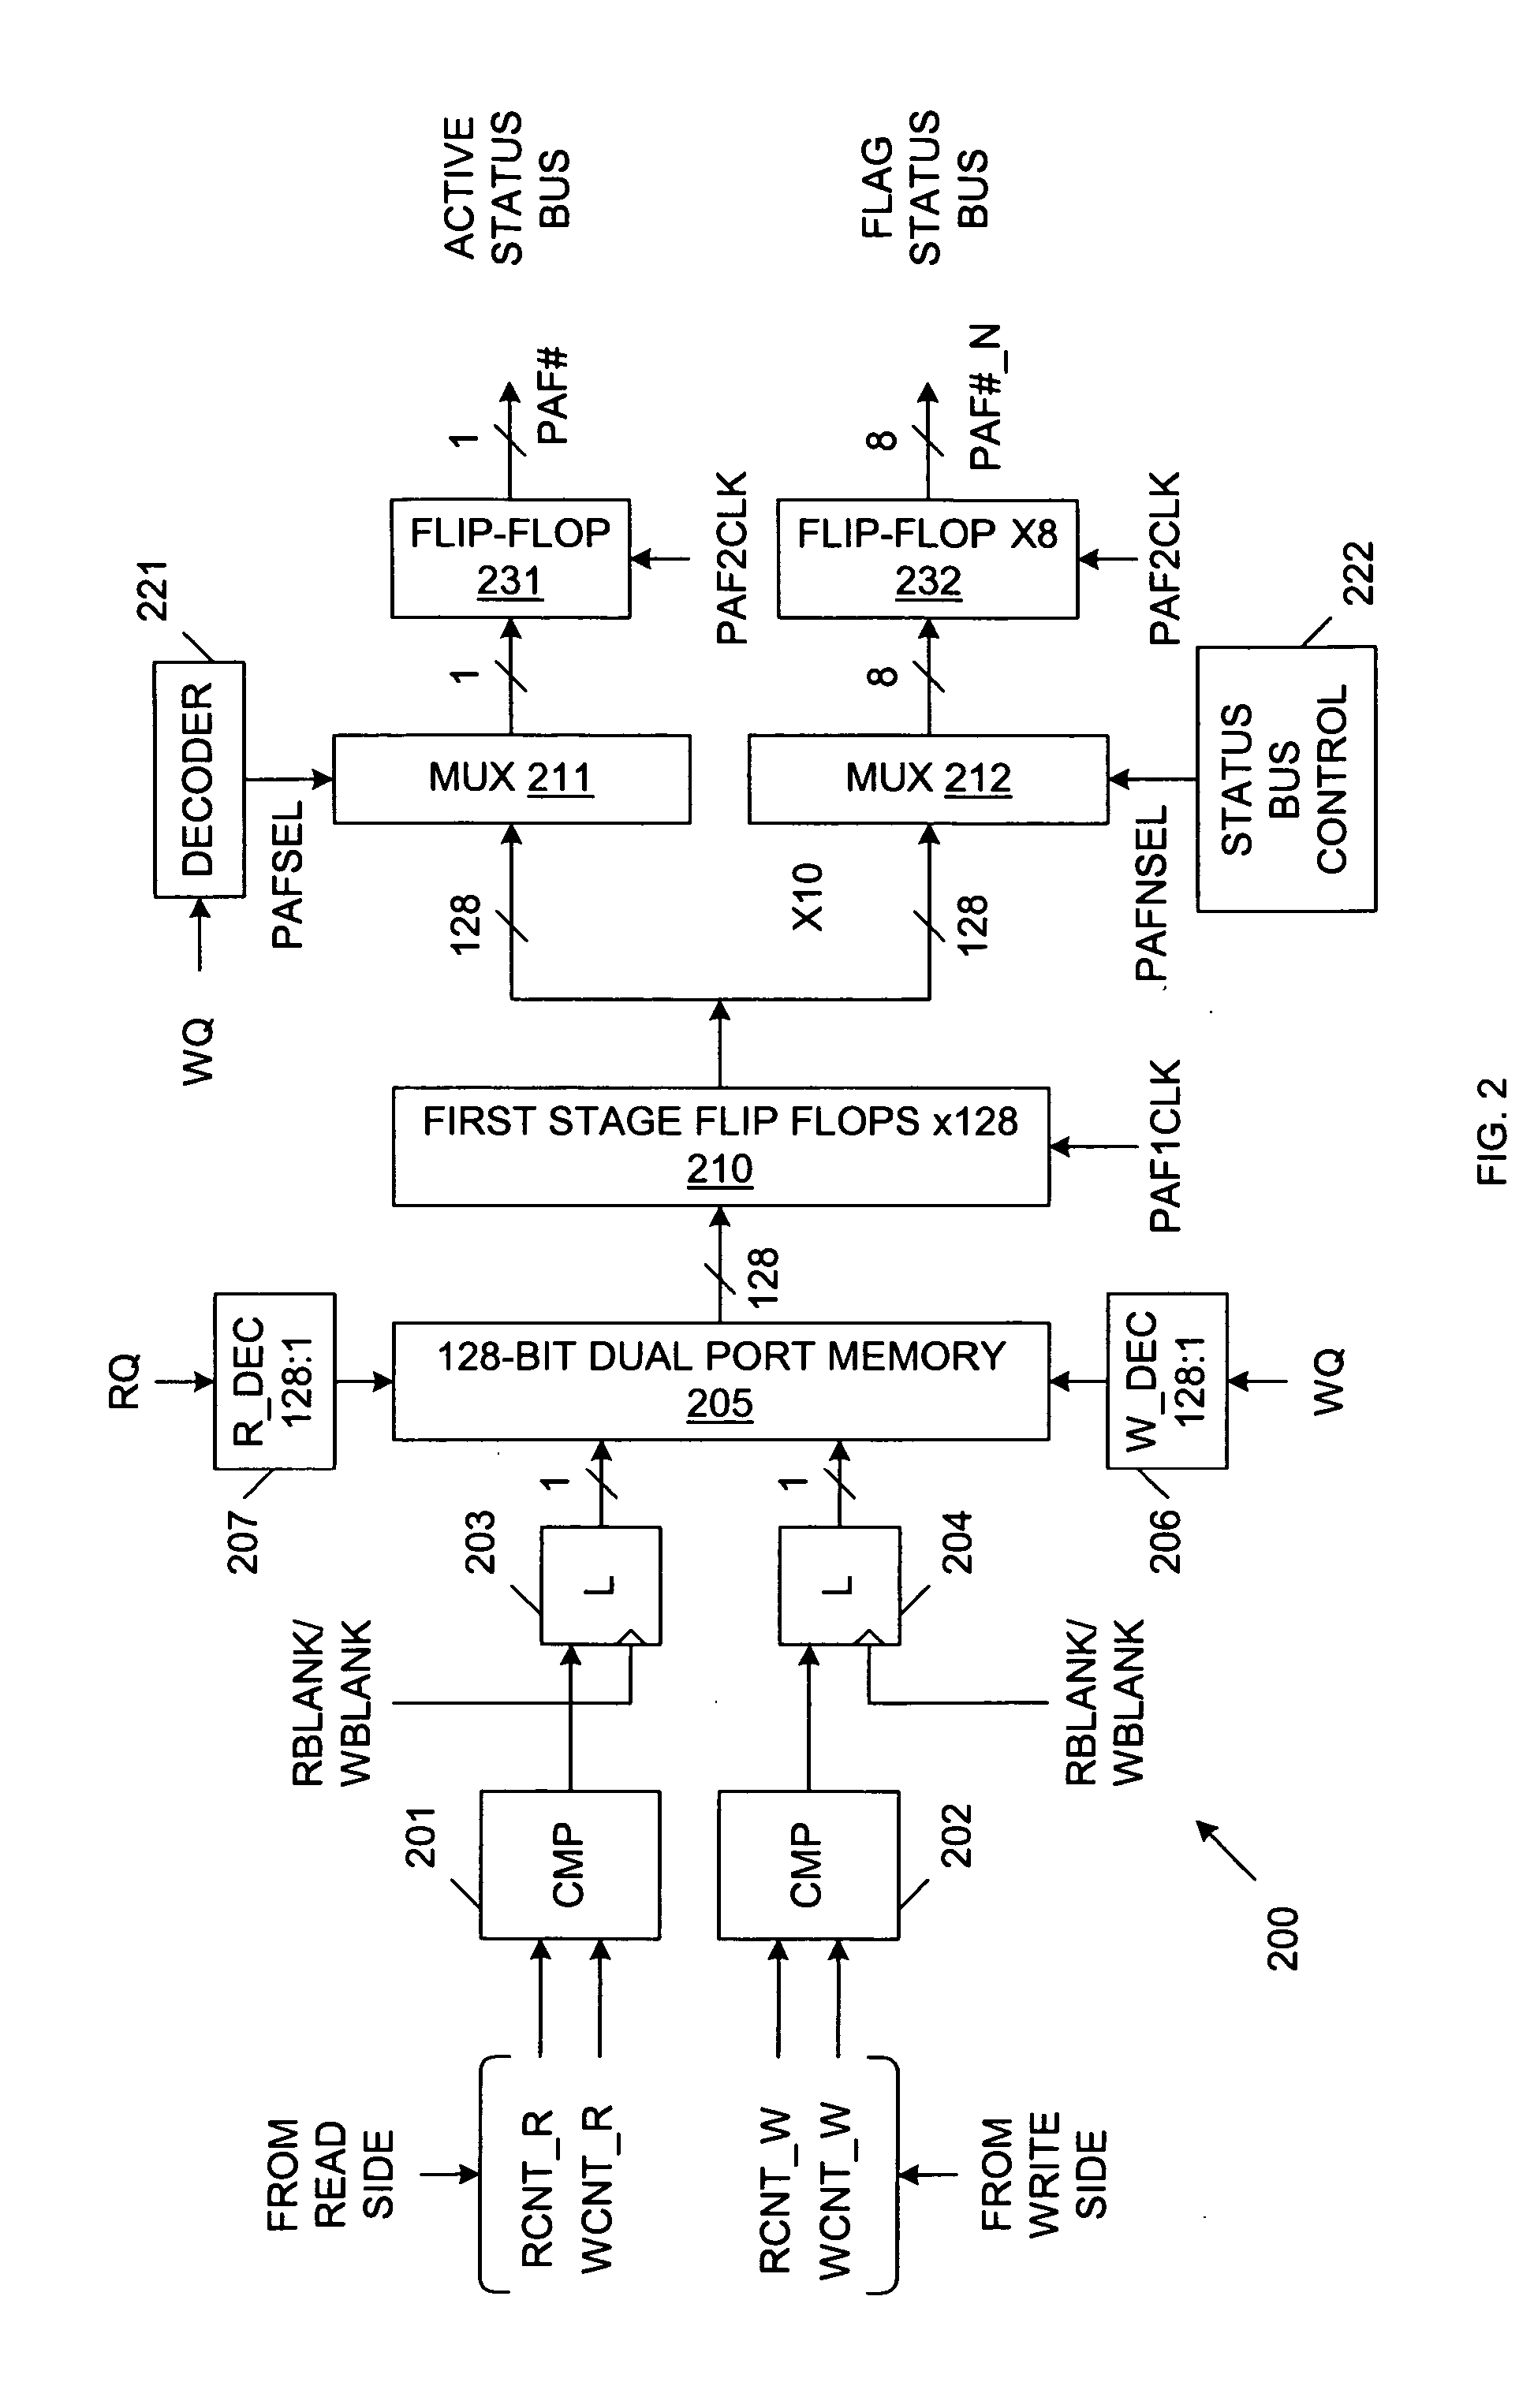 Status bus accessing only available quadrants during loop mode operation in a multi-queue first-in first-out memory system